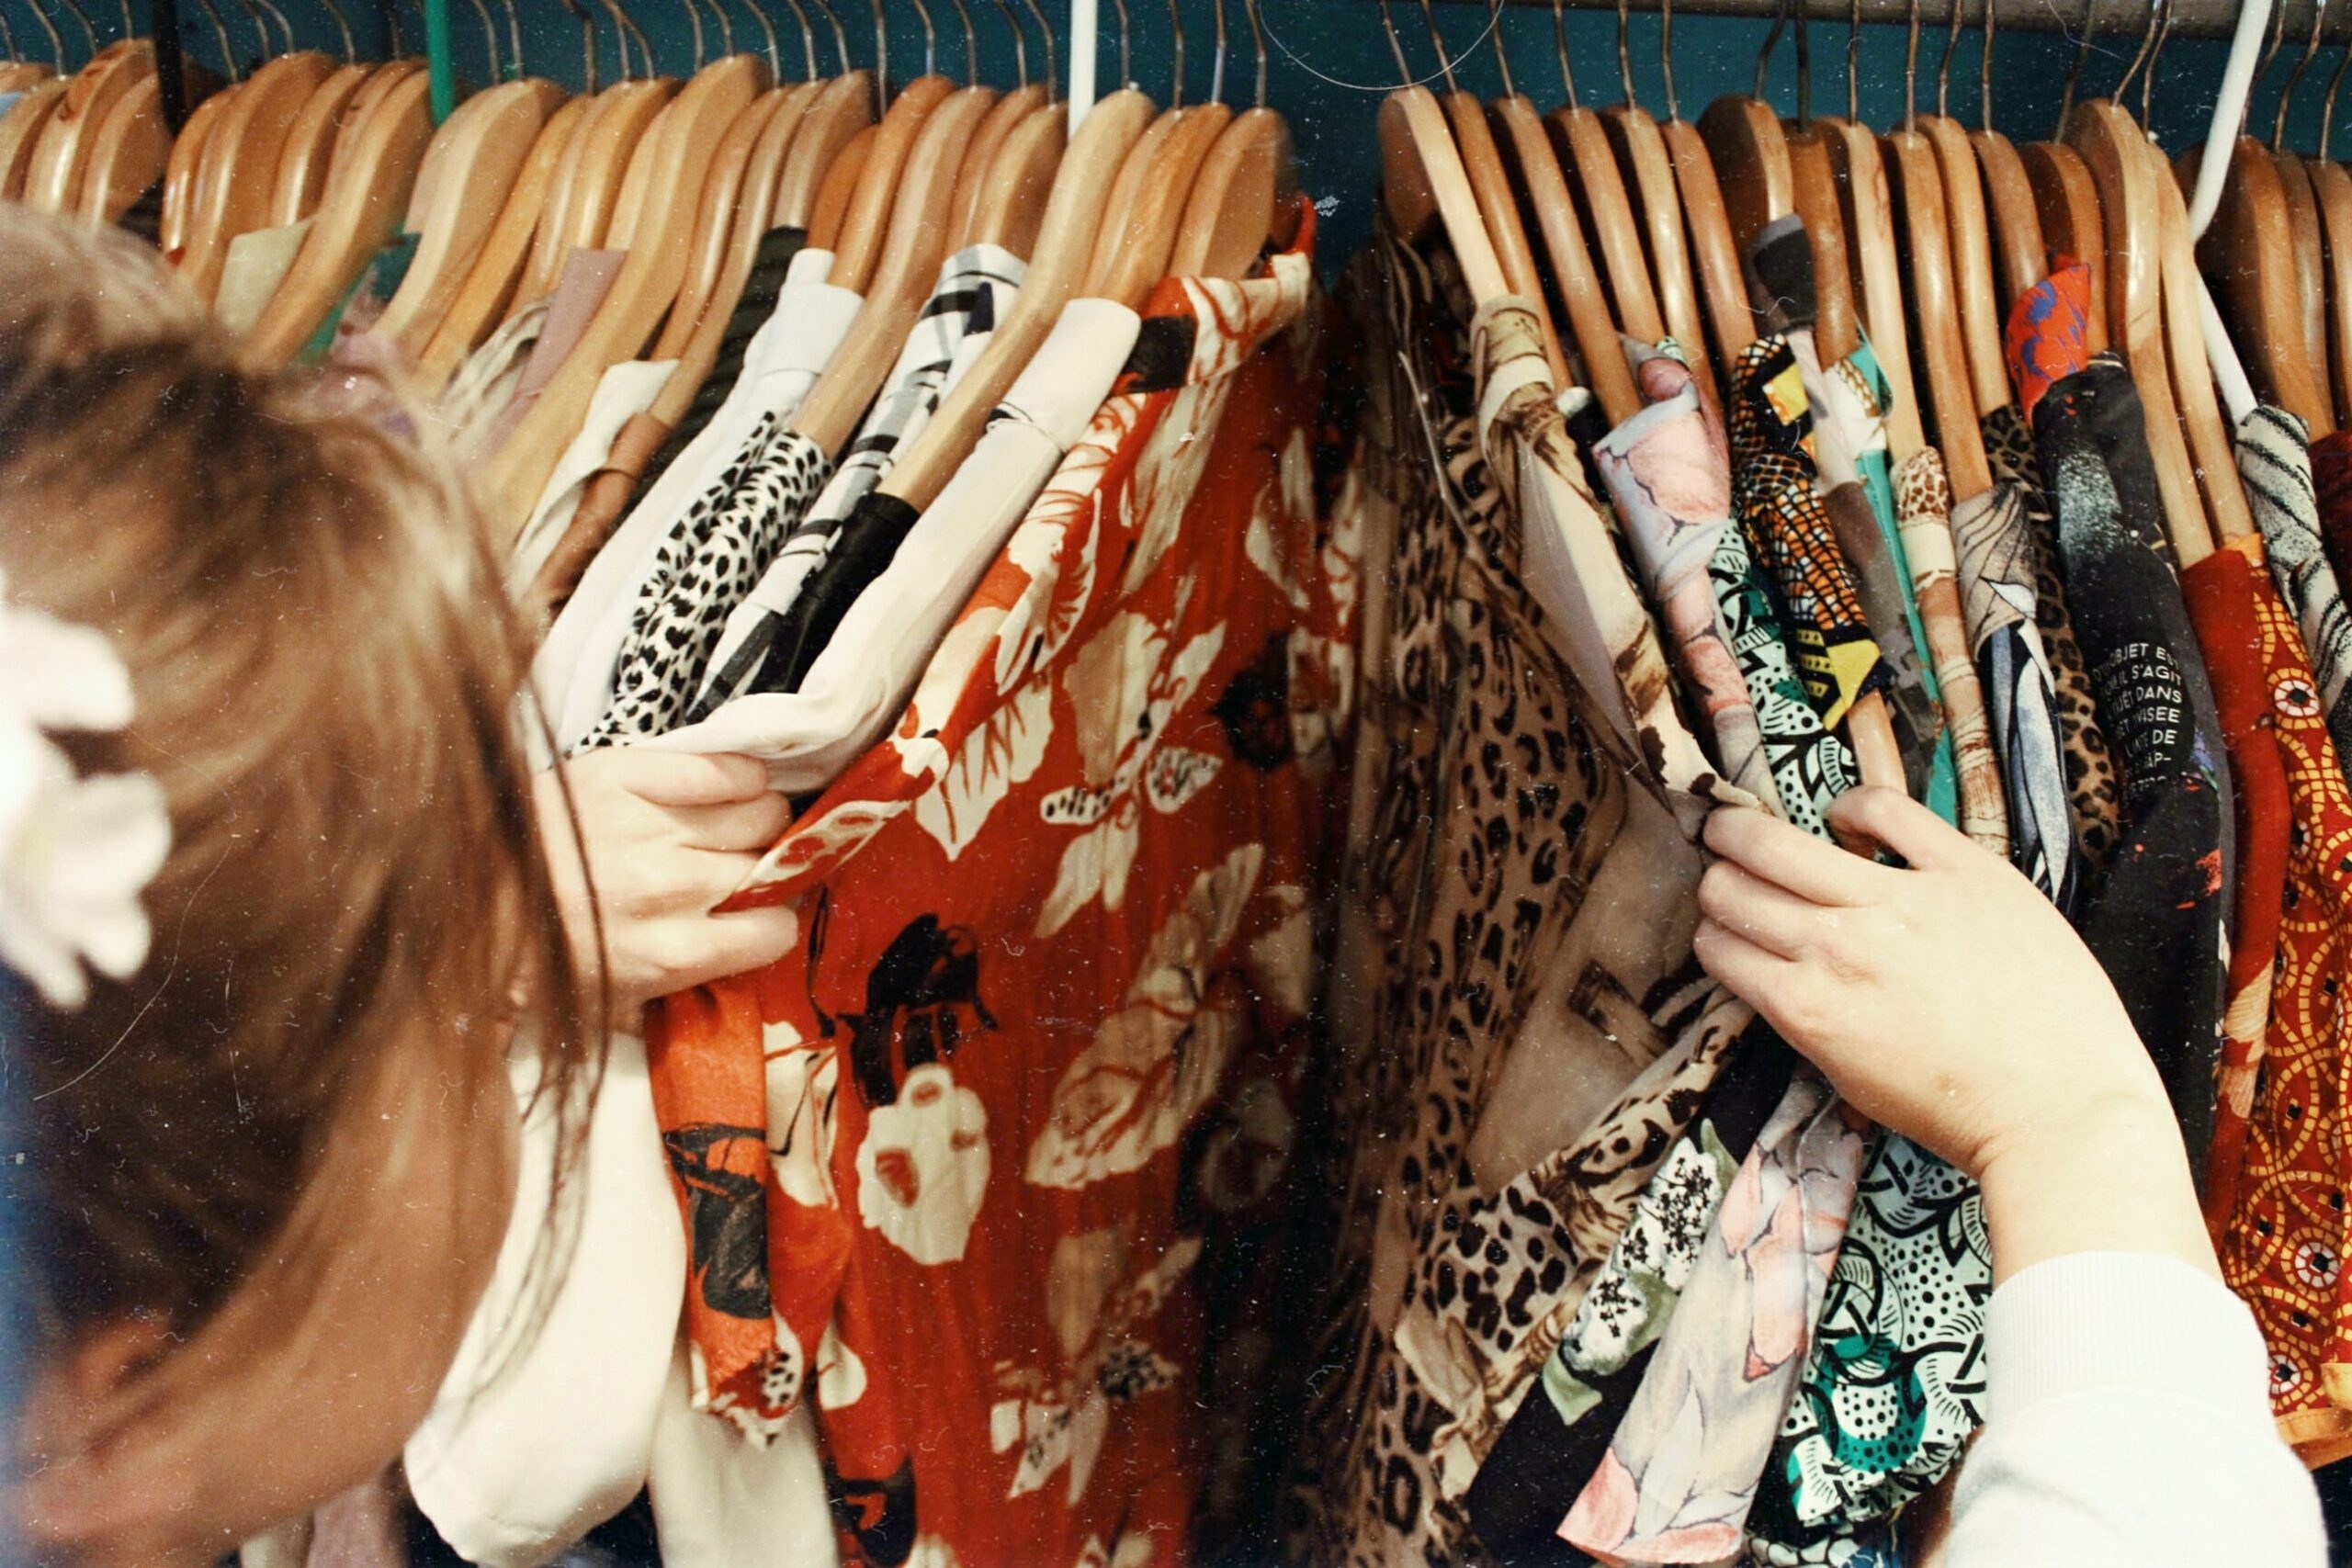 Vogue's guide to vintage shopping with What Goes Around Comes Around